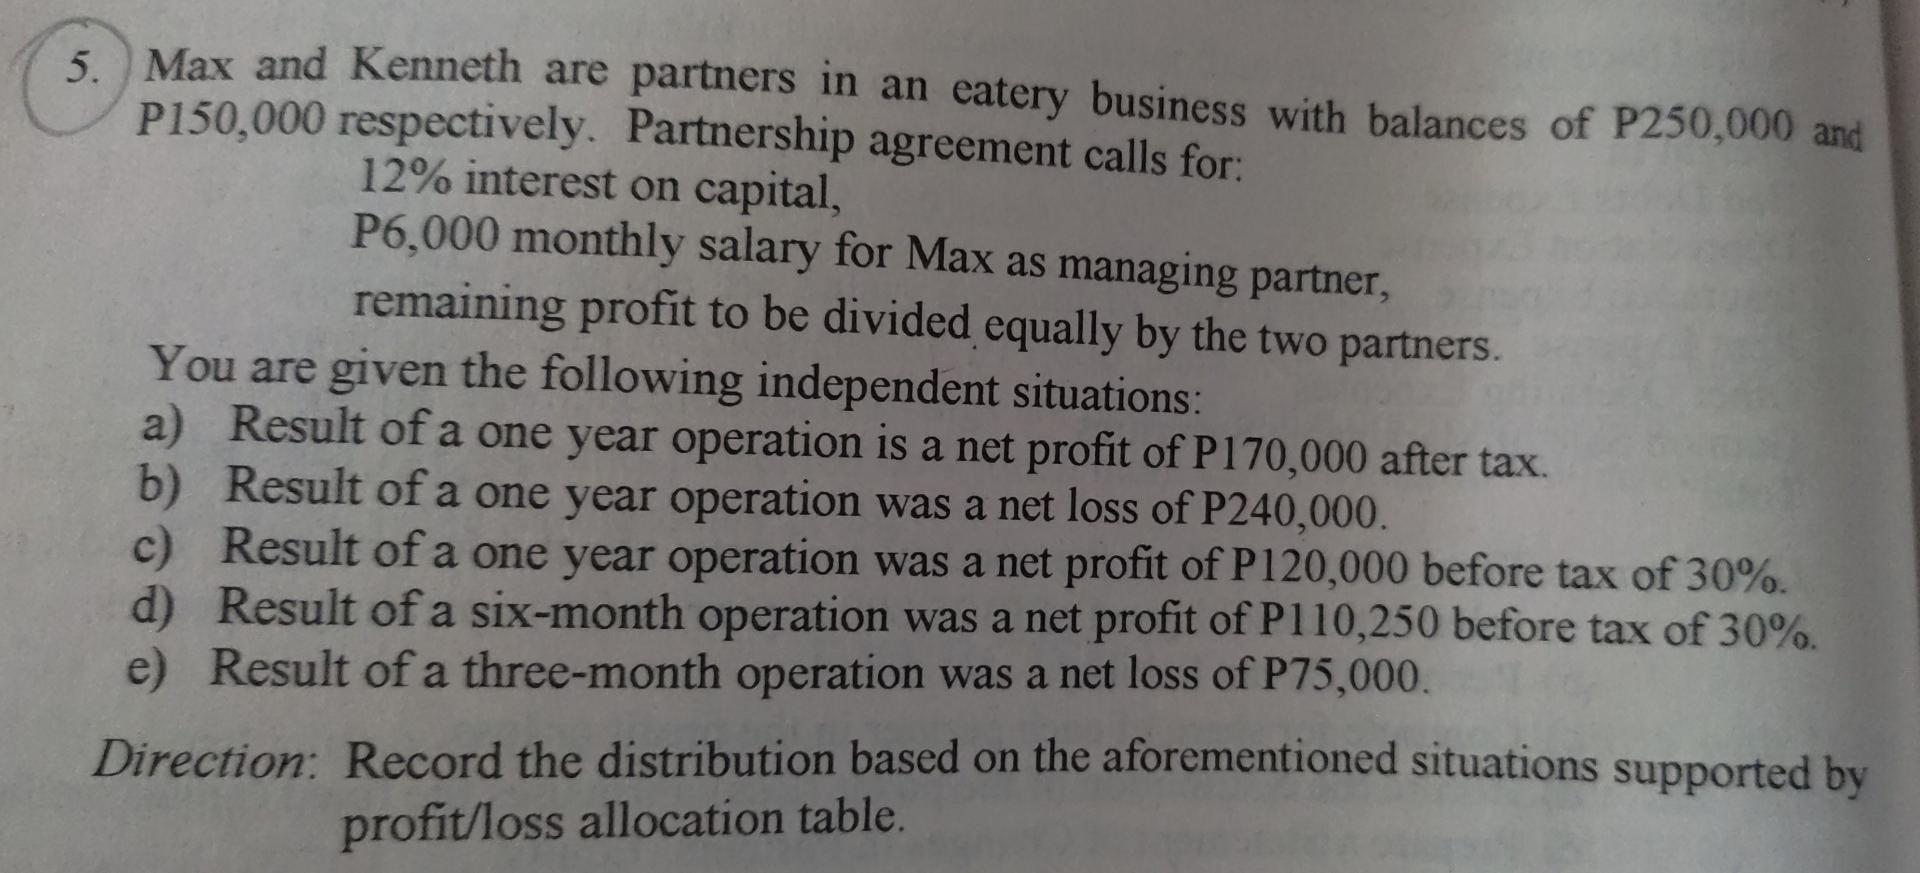 5. Max and Kenneth are partners in an eatery business with balances of P250,000 andP150,000 respectively. Partnership agreem